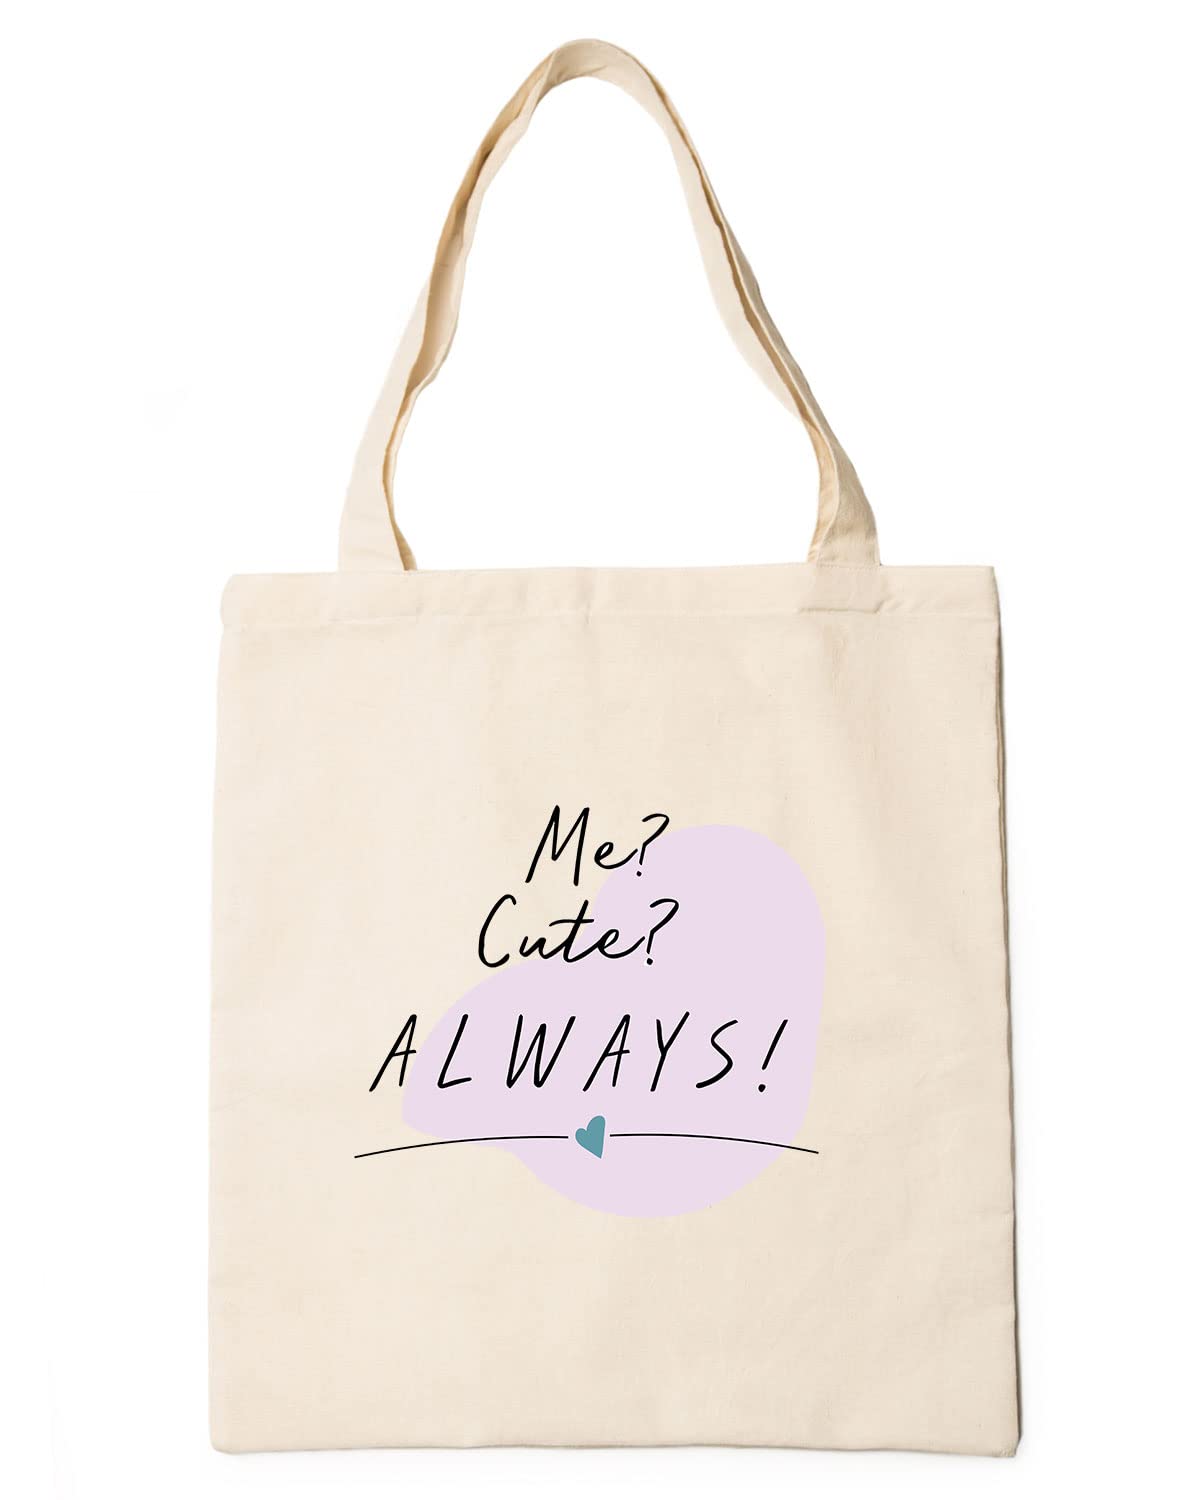 The Pink Magnet Me? Cute? Always! Tote Bag - Canvas Tote Bag for Women | Printed Multipurpose Cotton Bags | Cute Hand Bag for Girls | Best for College, Travel, Grocery | Reusable Shopping Bag | Eco-Friendly Tote Bag